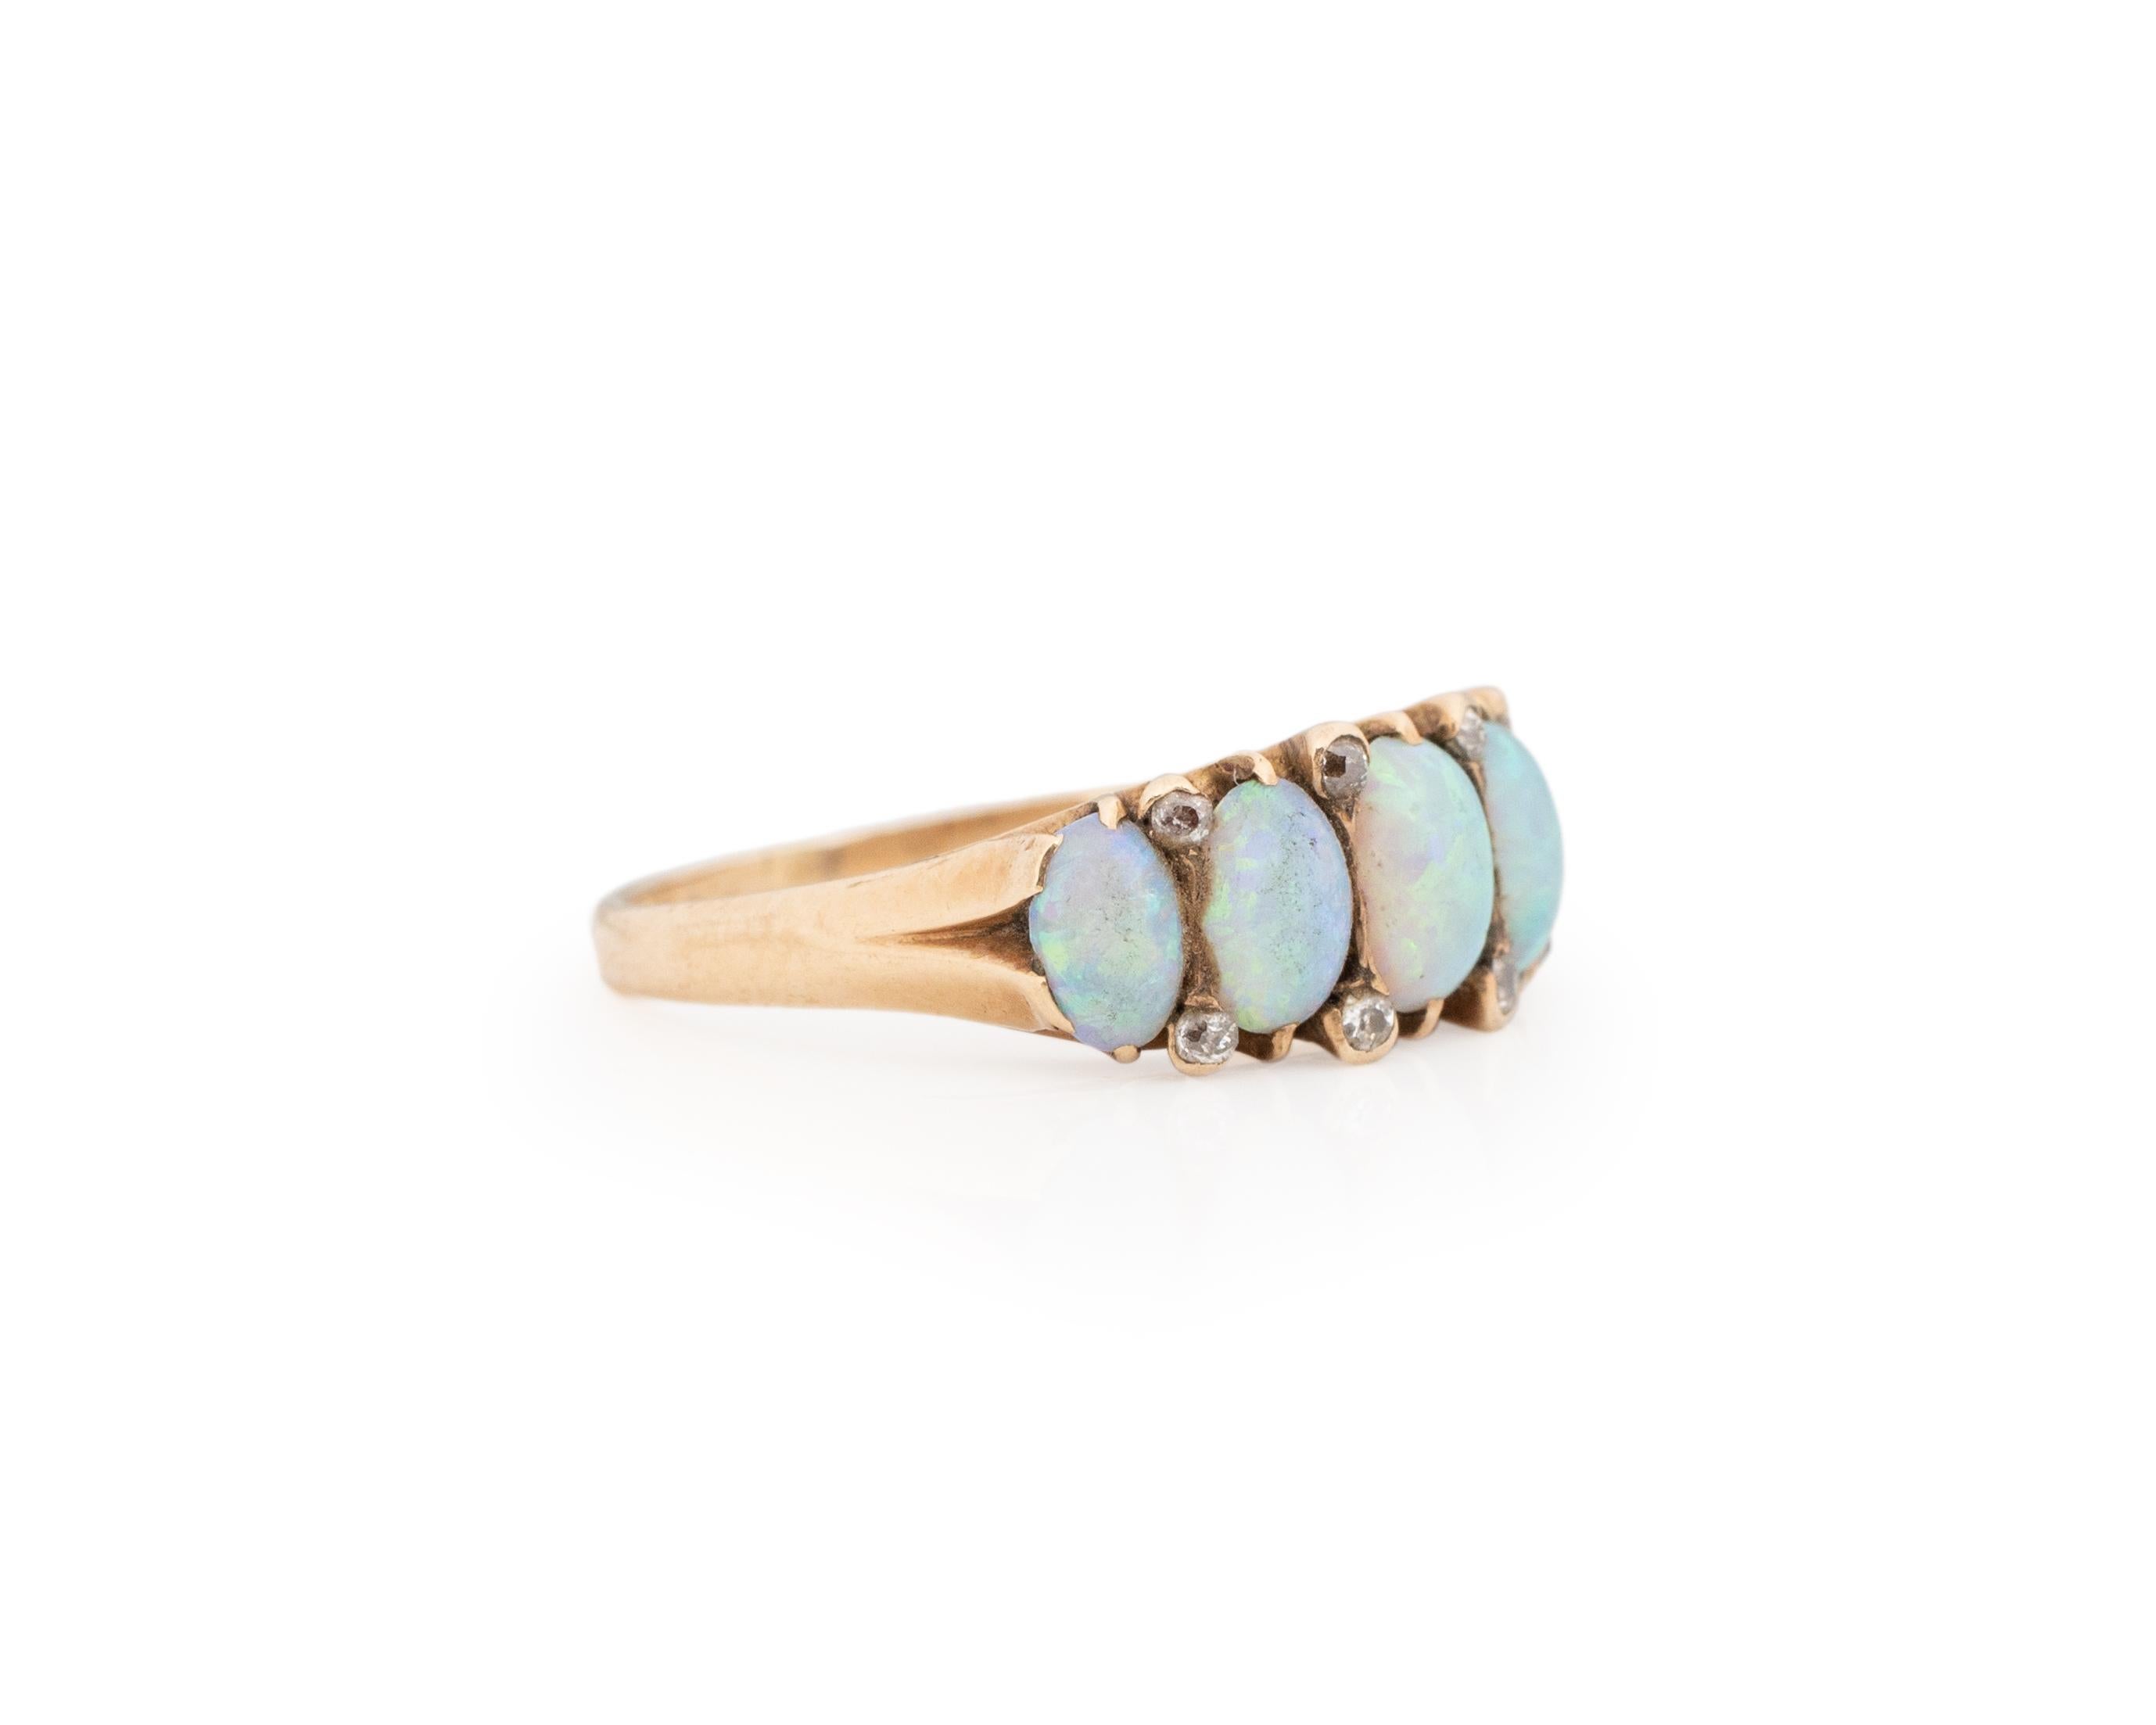 Item Details:
Ring Size: 5.5
Metal Type: 14K Yellow Gold [Hallmarked, and Tested]
Weight: 3.0 grams
Opal Details:
Weight: 2.00ct
Cut: Oval Cabochon
Color: Mixed colors
Side Diamond Details:
Weight: .10ct, total
Cut: Old European brilliant
Color: